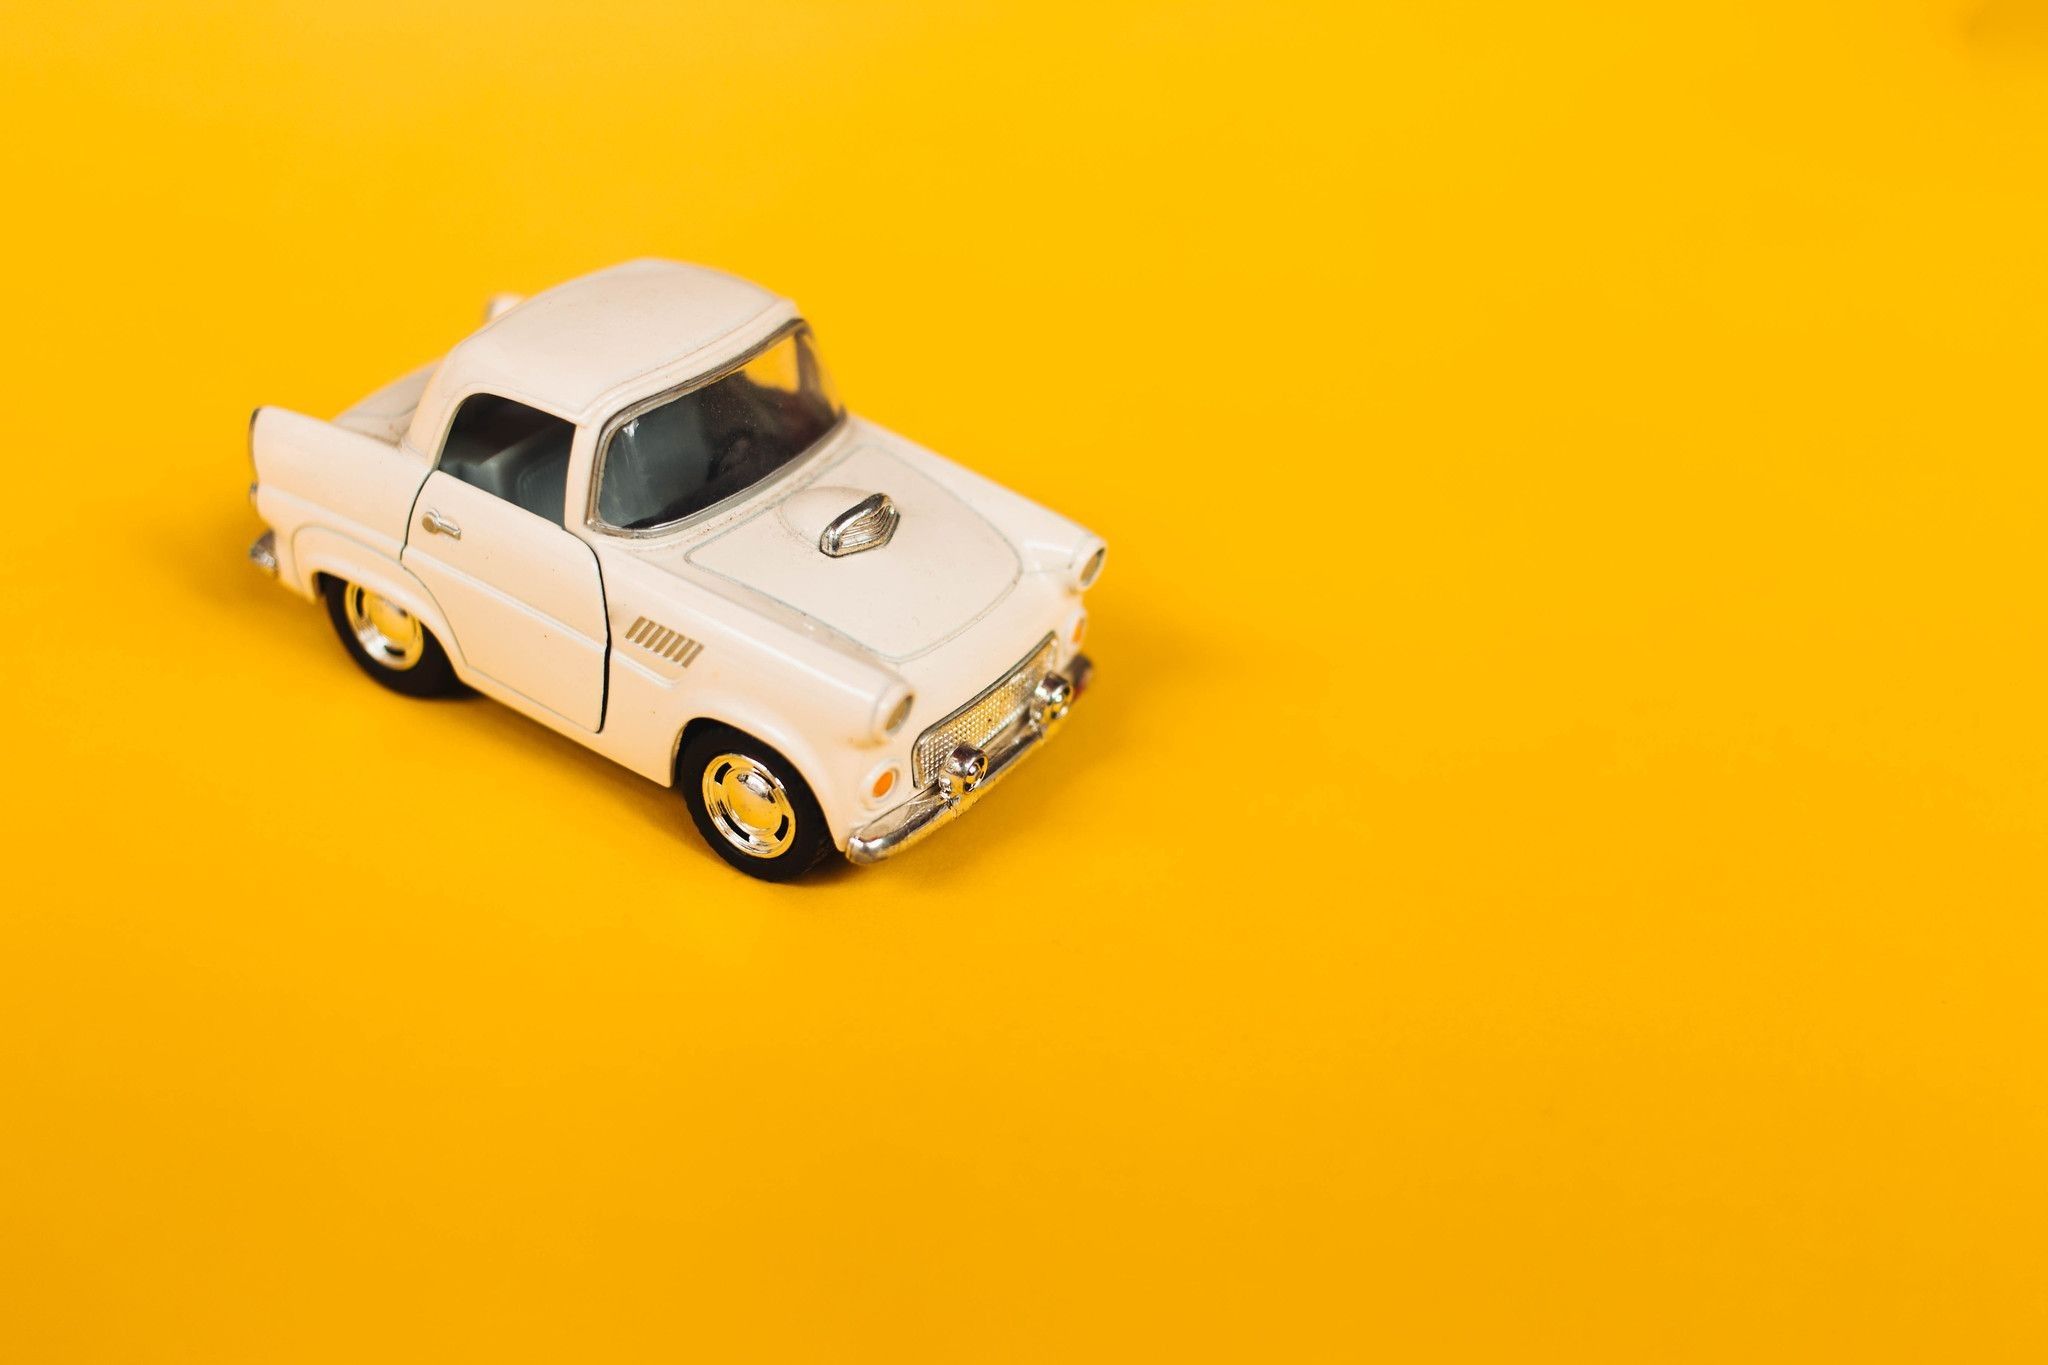 Classic fifties scale model toy car from front view with yellow background